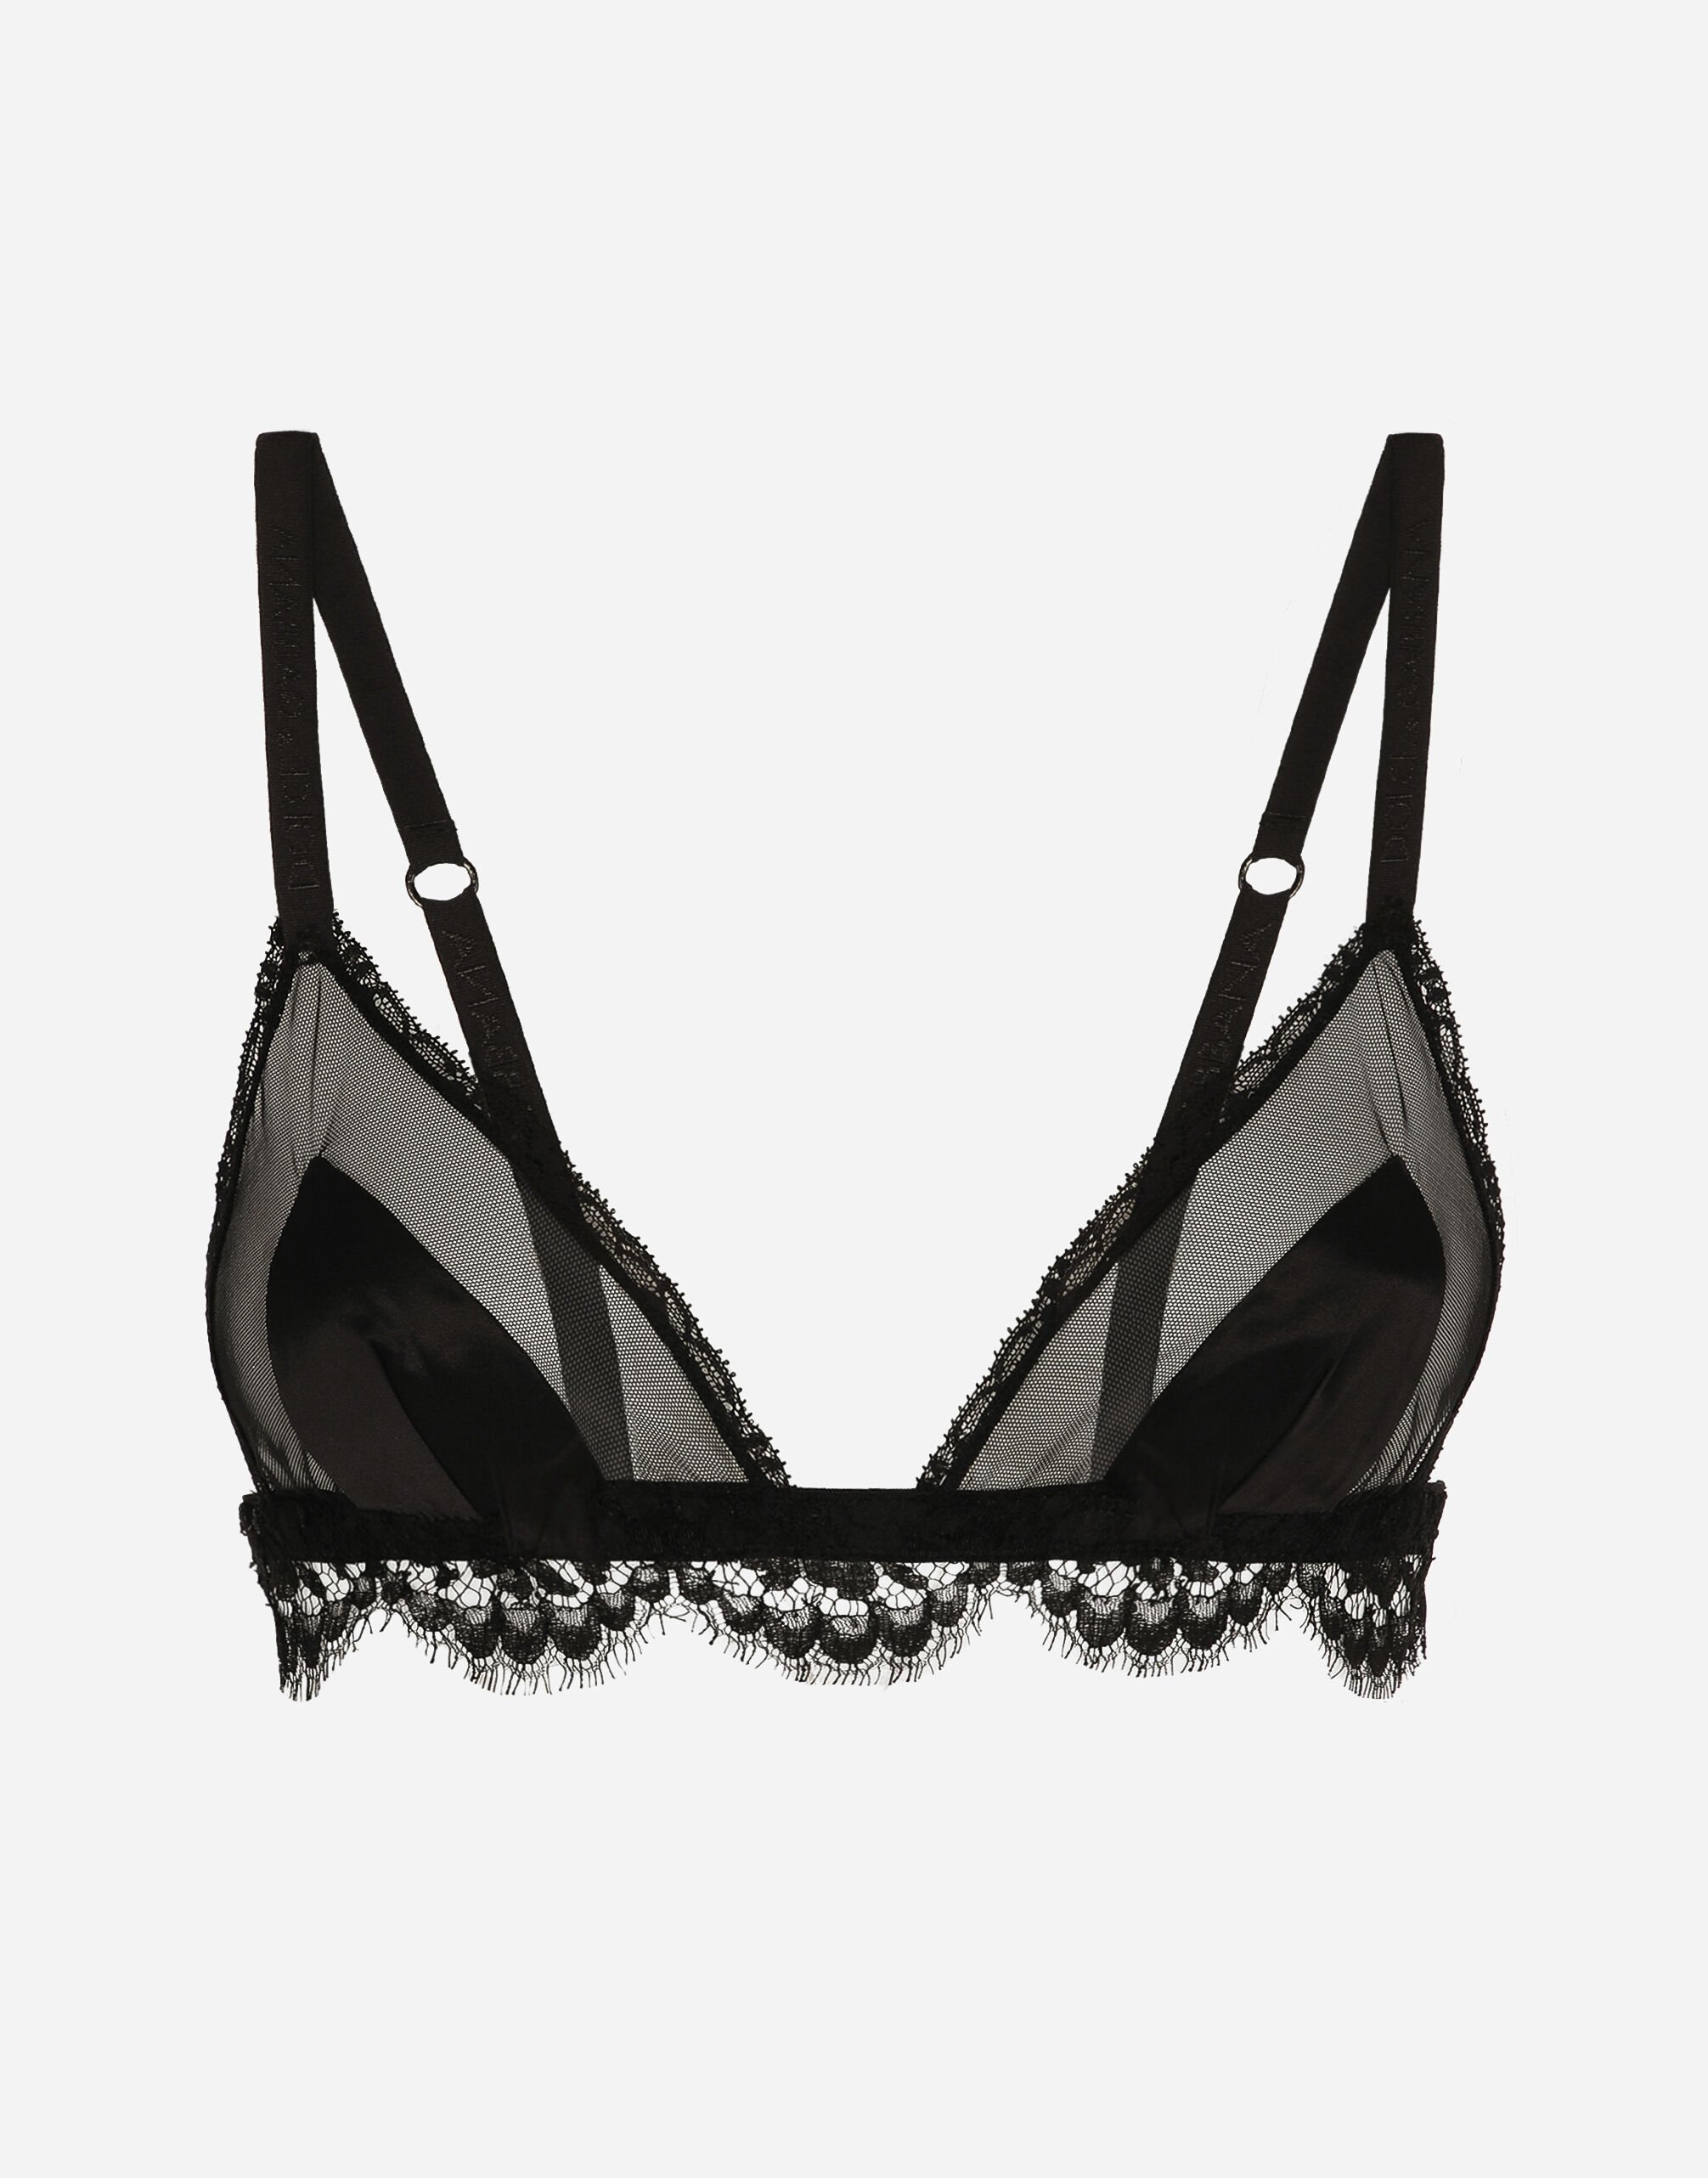 Dolce & Gabbana Satin, lace and tulle soft-cup triangle bra Black BB6711AV893